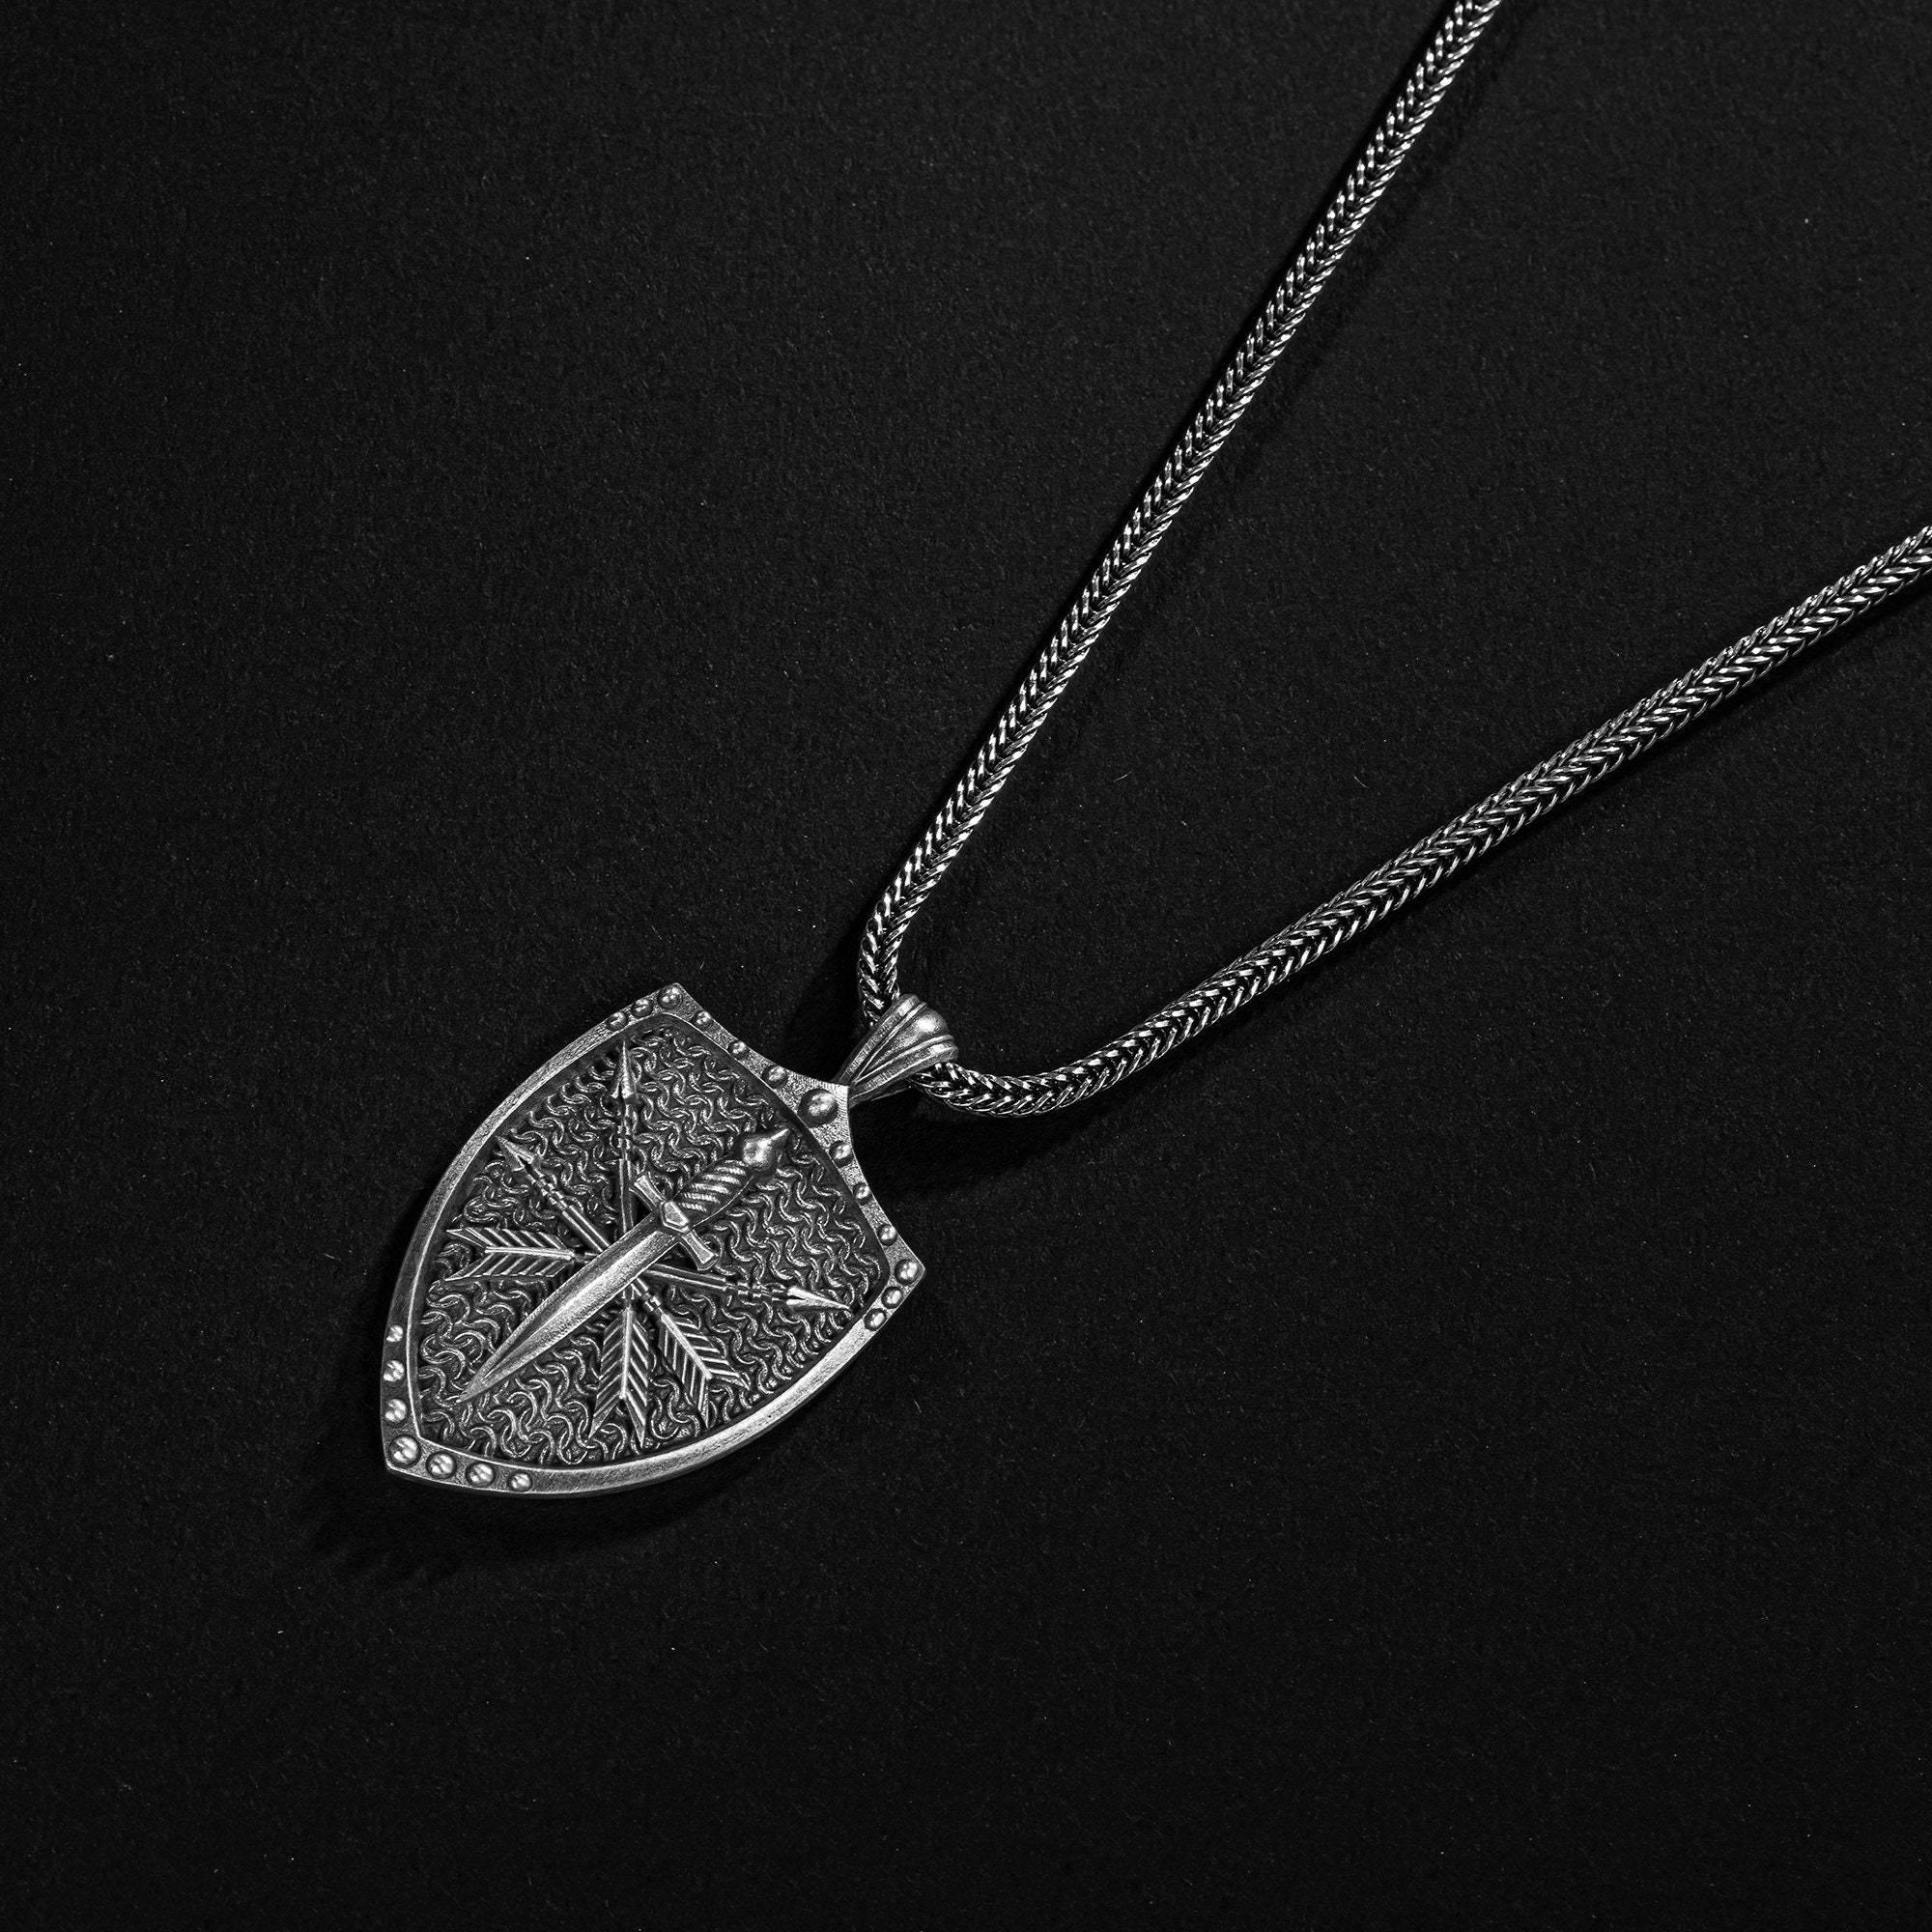 Silver Viking Sword Necklace, Oxidized Silver Shield Pendant, Viking Arrow Necklace - OXO SILVER